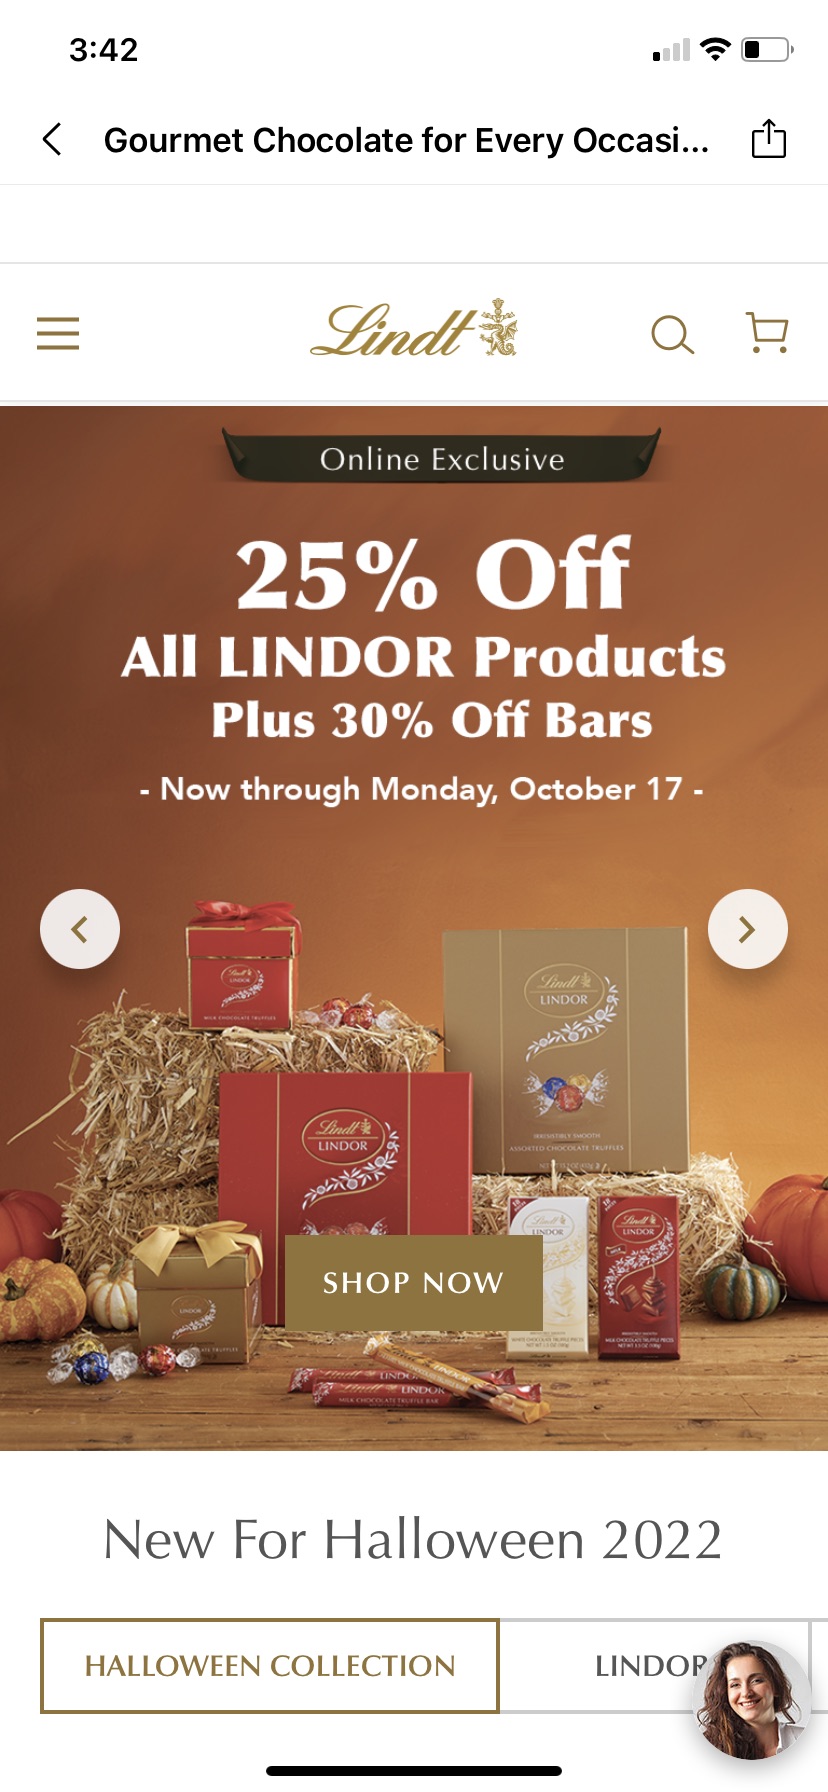 Gourmet Chocolate for Every Occasion | Lindt USA